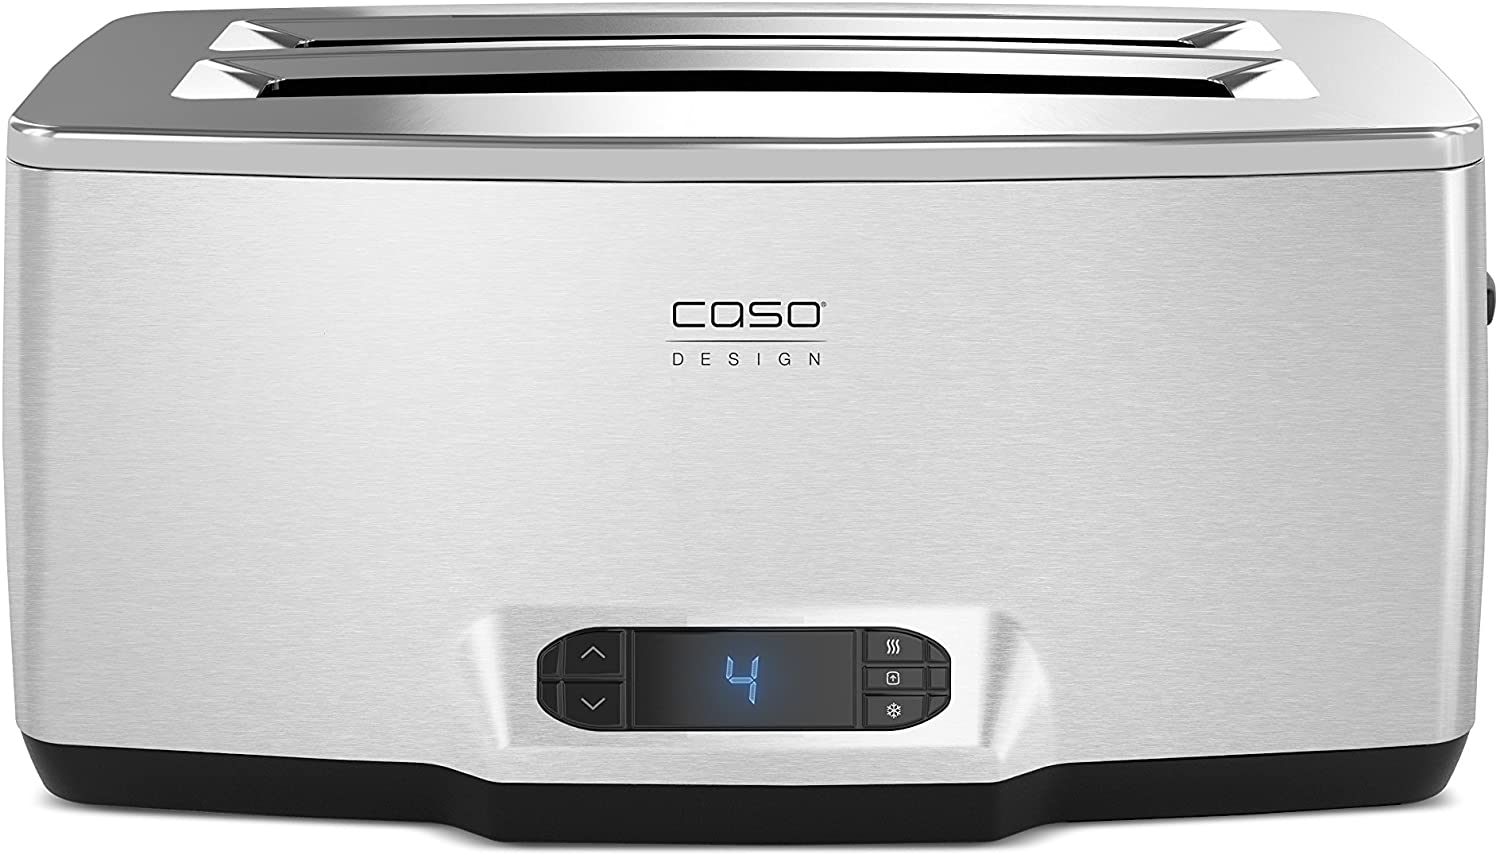 Caso 2779 Inox 4 Design Toaster 4 Slices Made of High-Quality Stainless Steel Automatic Toast Extra Large LCD Display 1800 W Silver